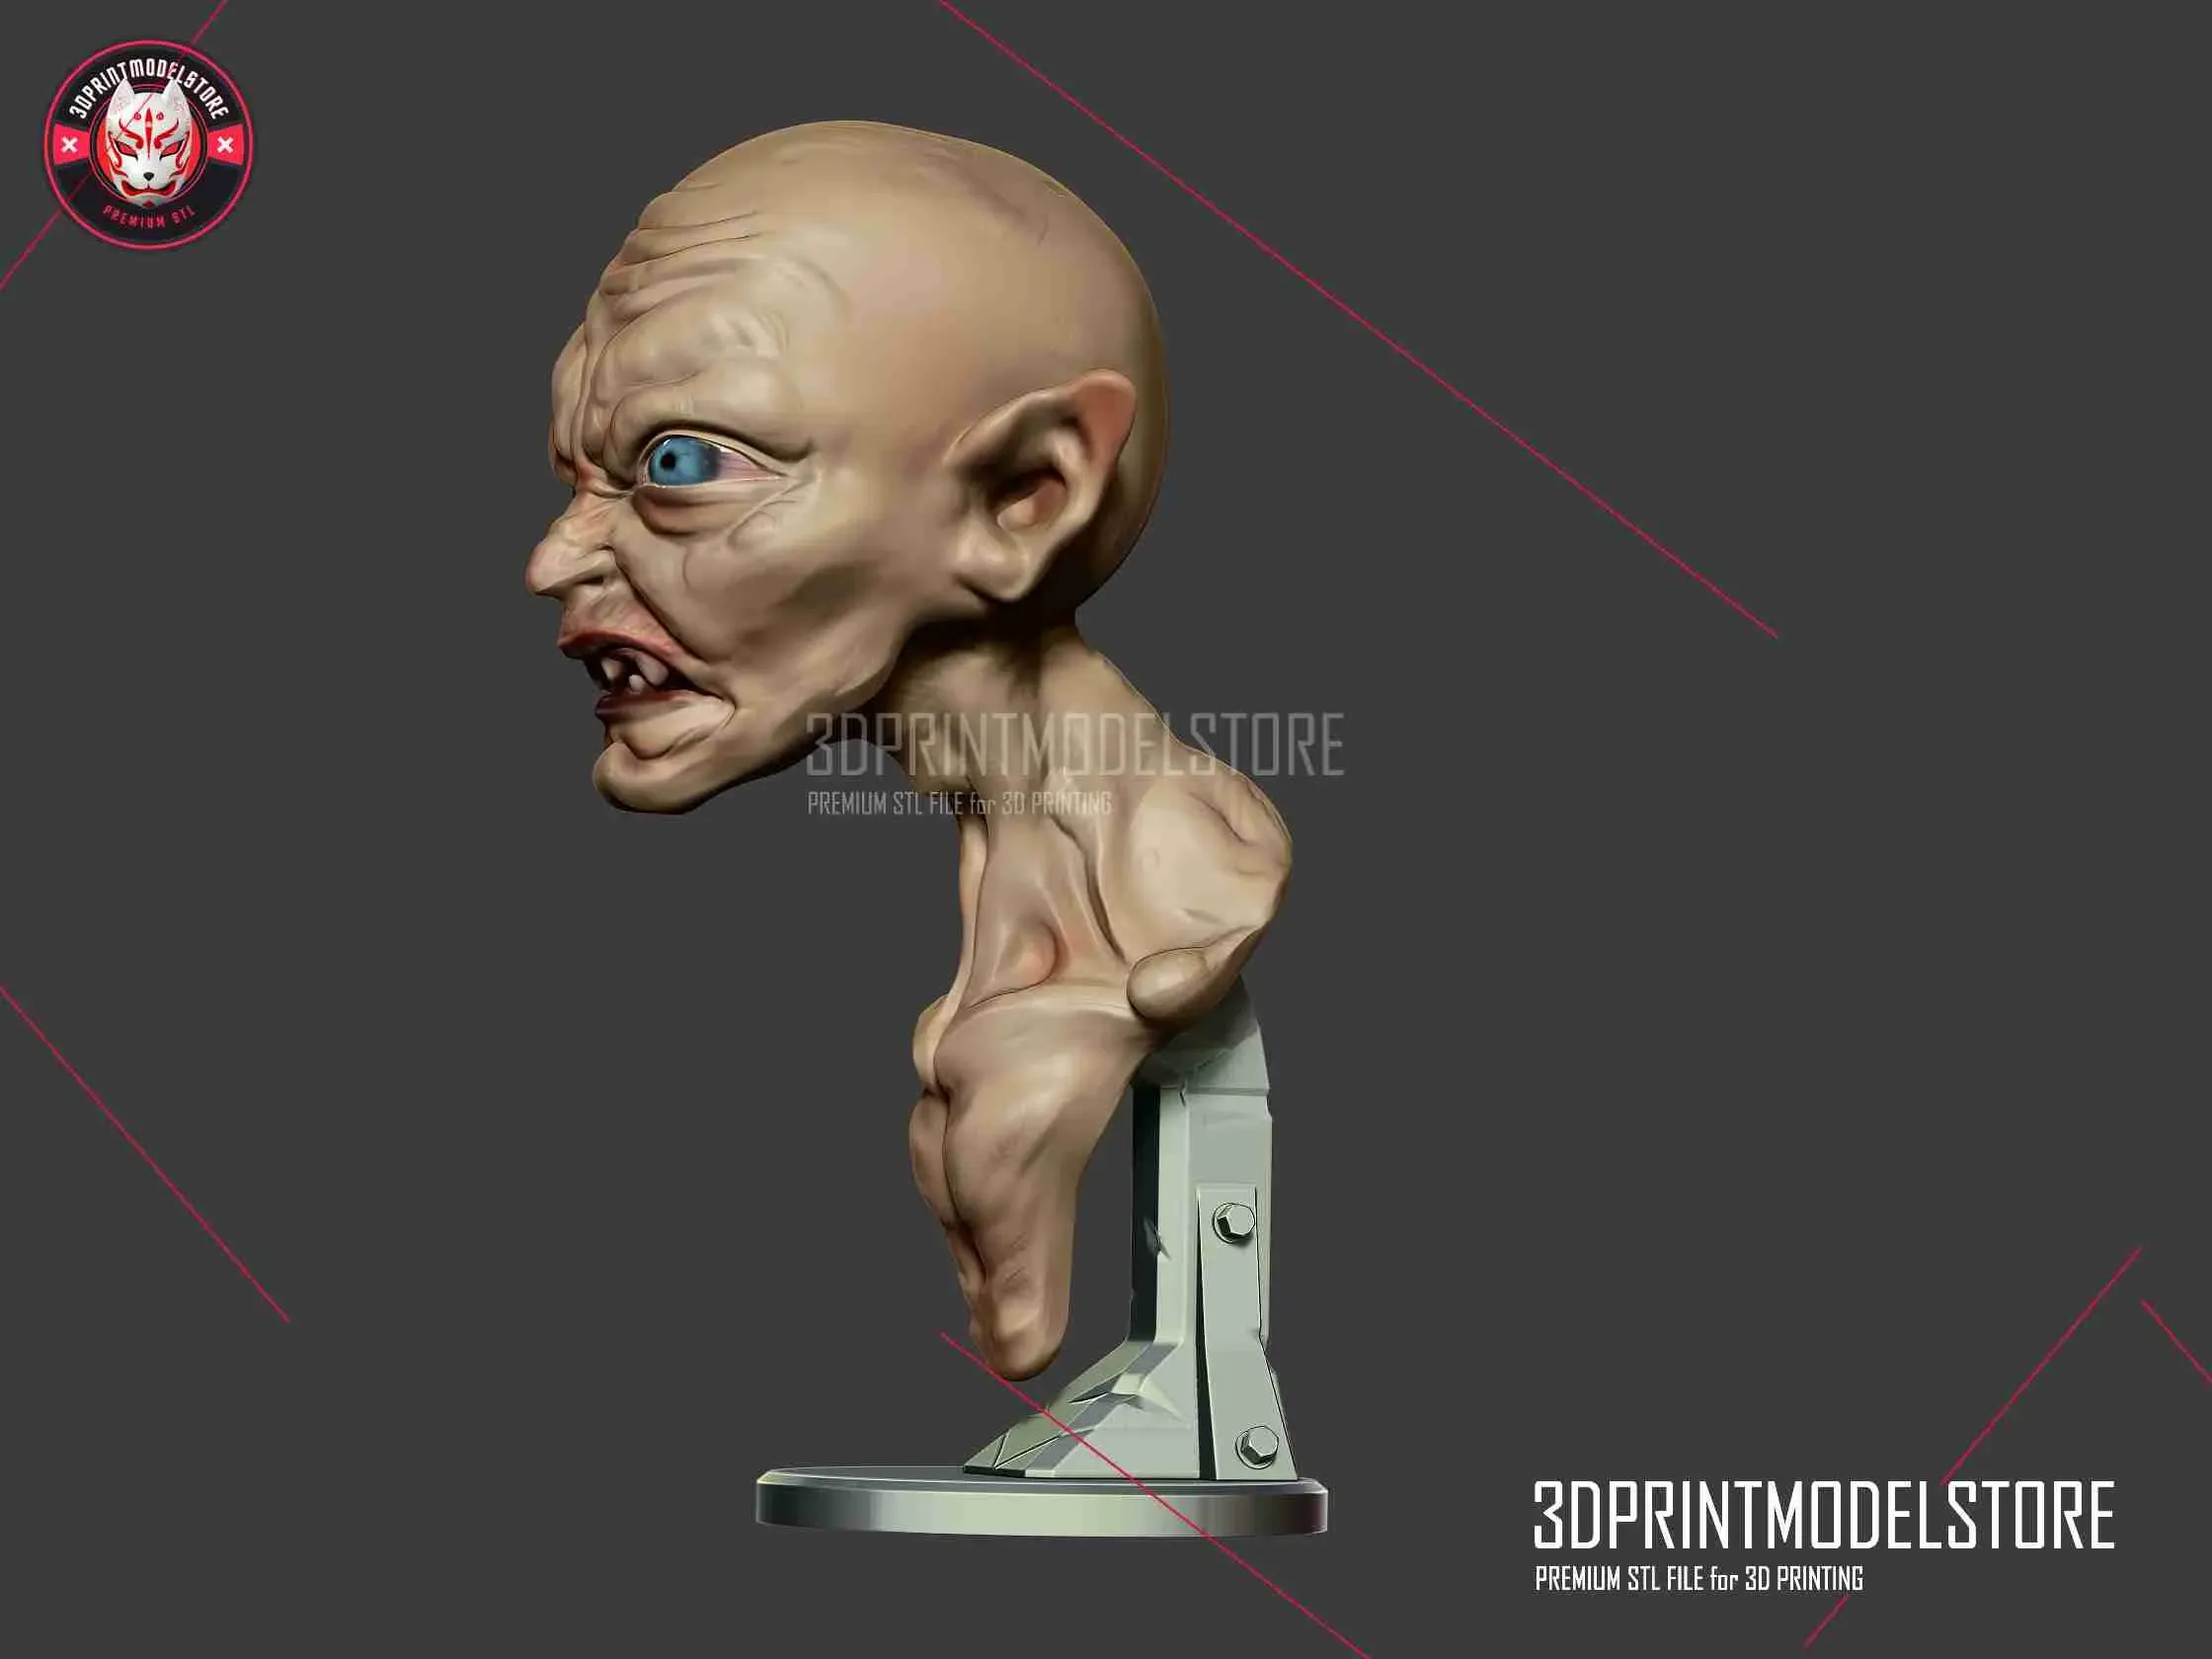 Gollum Miniature Bust Toy - Lord of the Rings